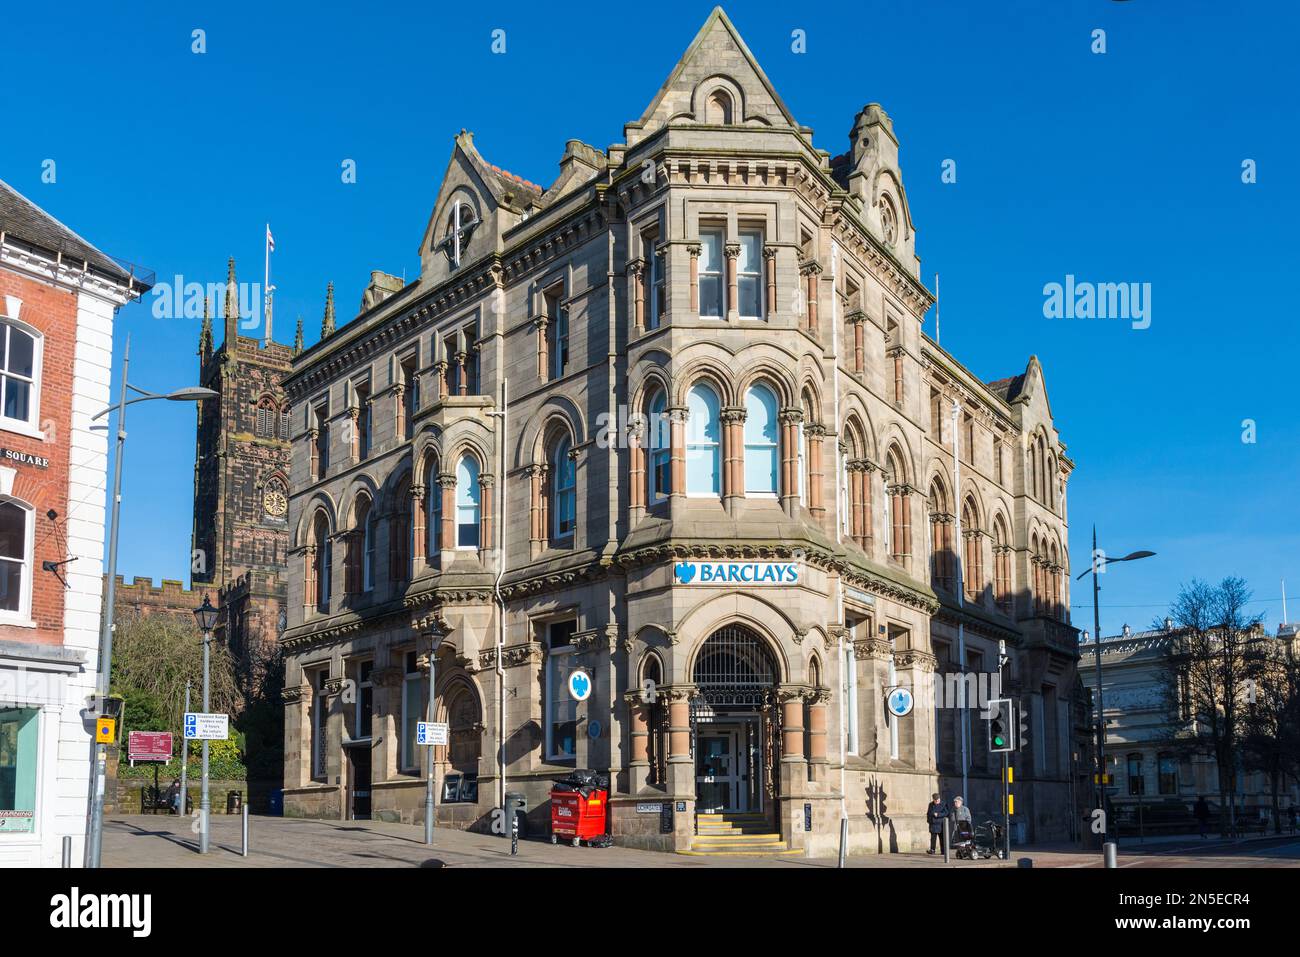 The impressive Barclays Bank building in Queen Square, Wolverhampton, UK Stock Photo